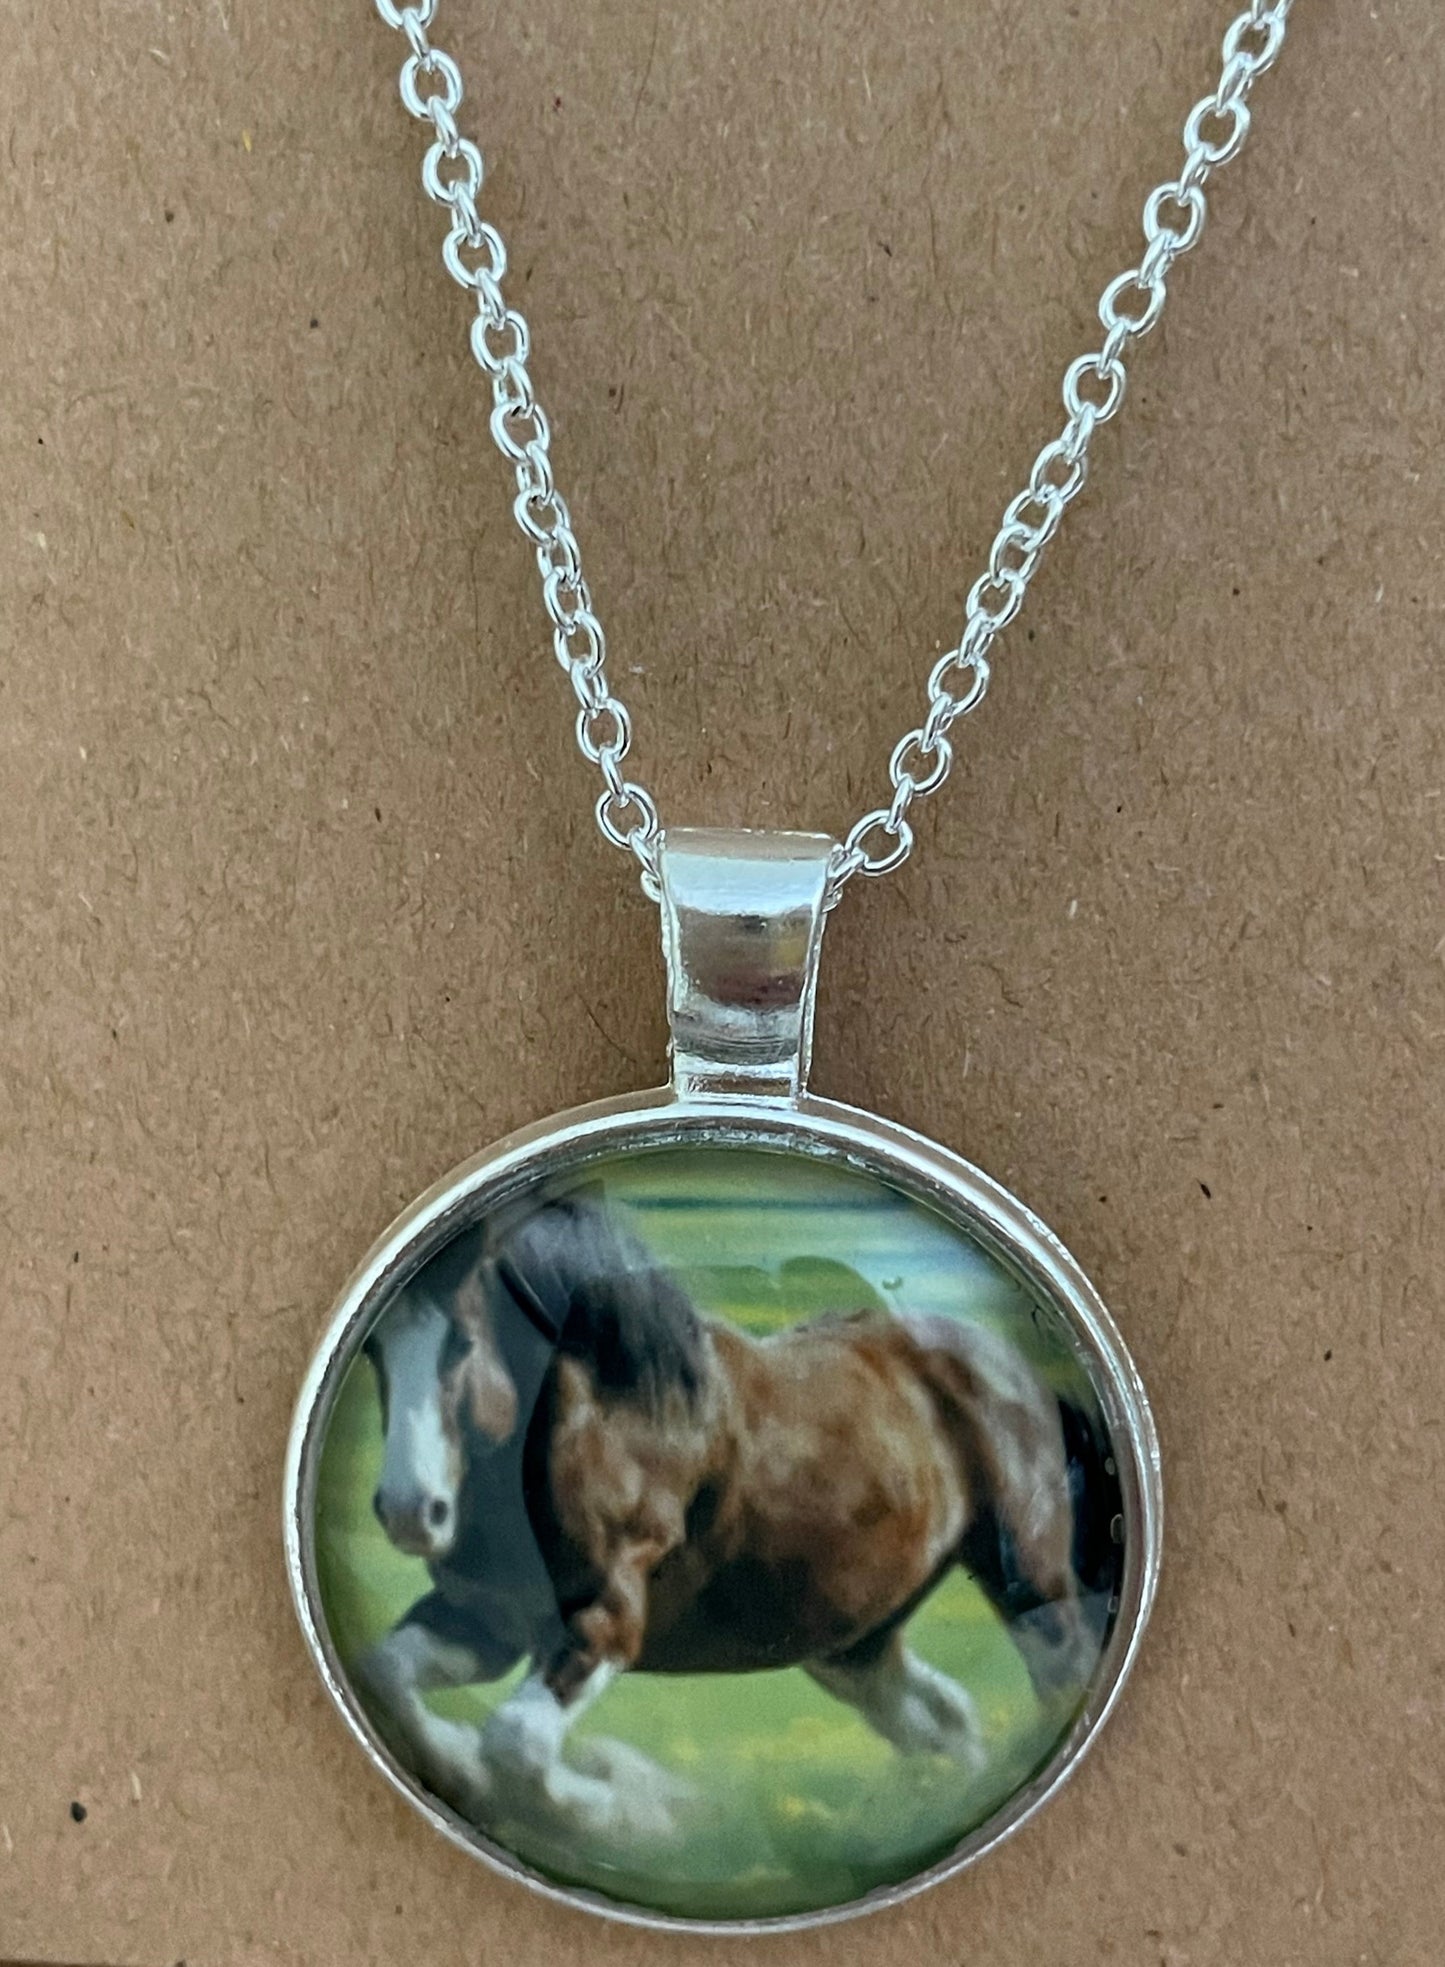 Clydesdale Horse Necklace